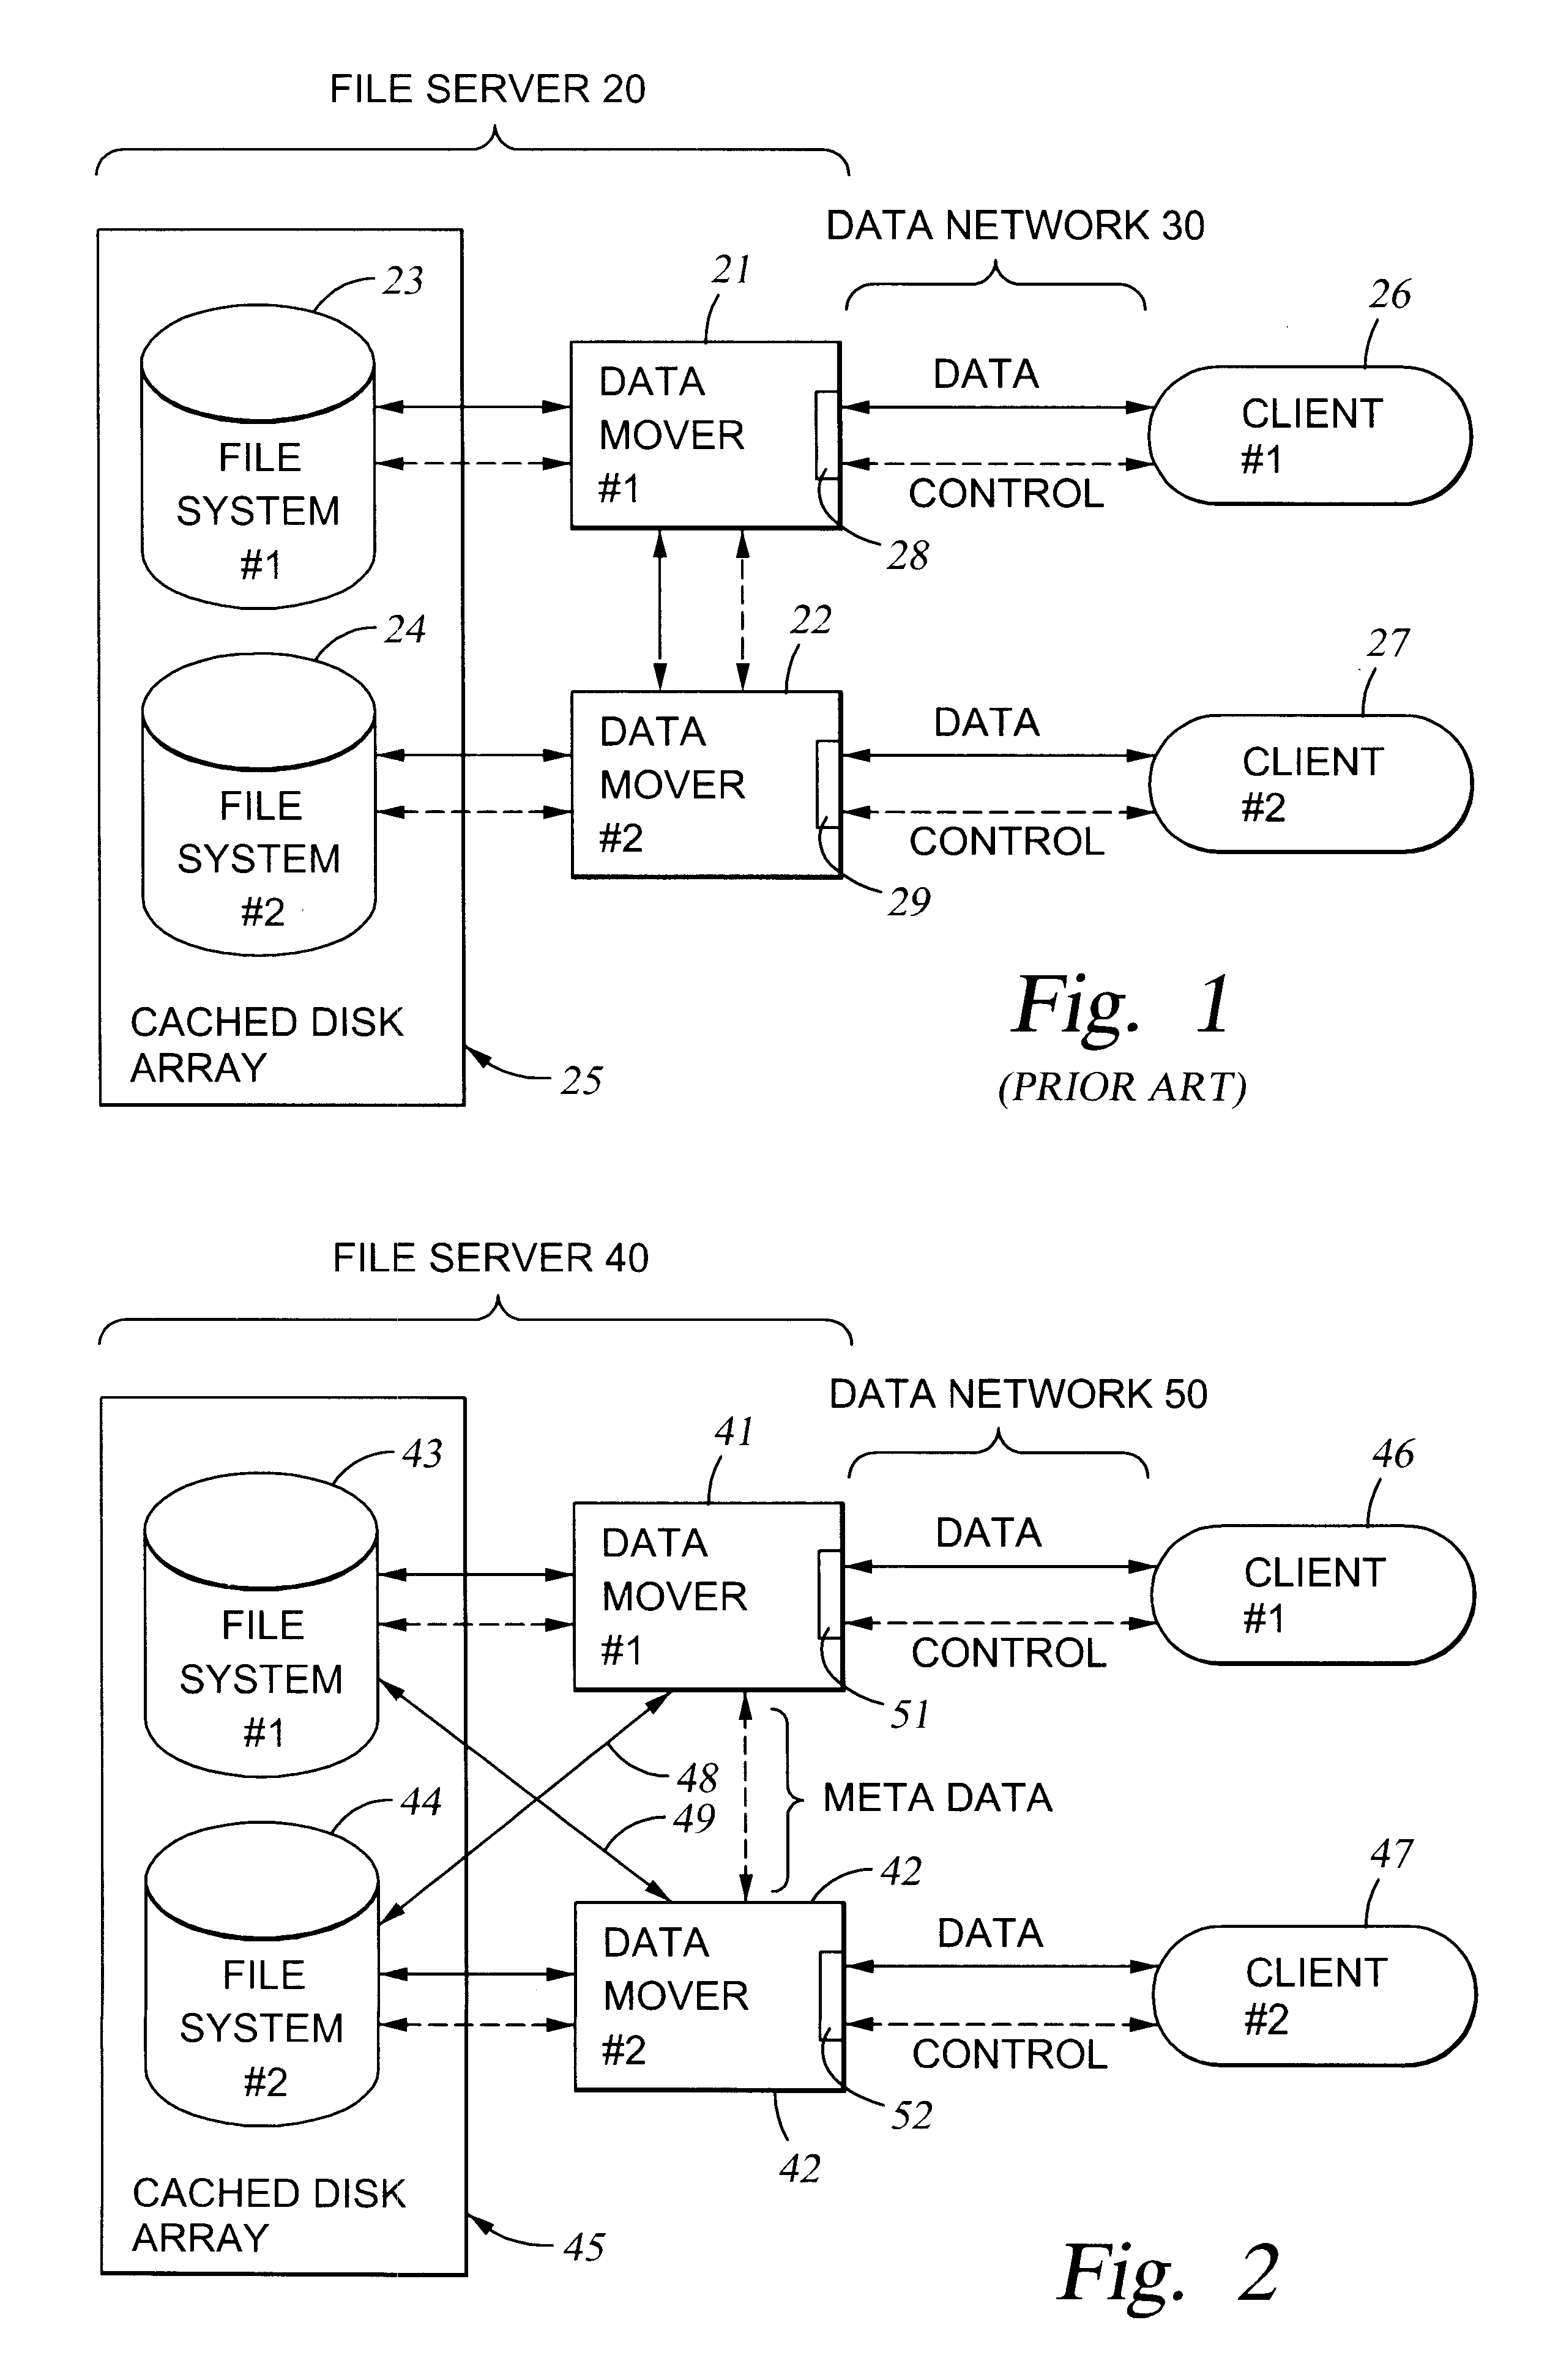 File server system using connection-oriented protocol and sharing data sets among data movers